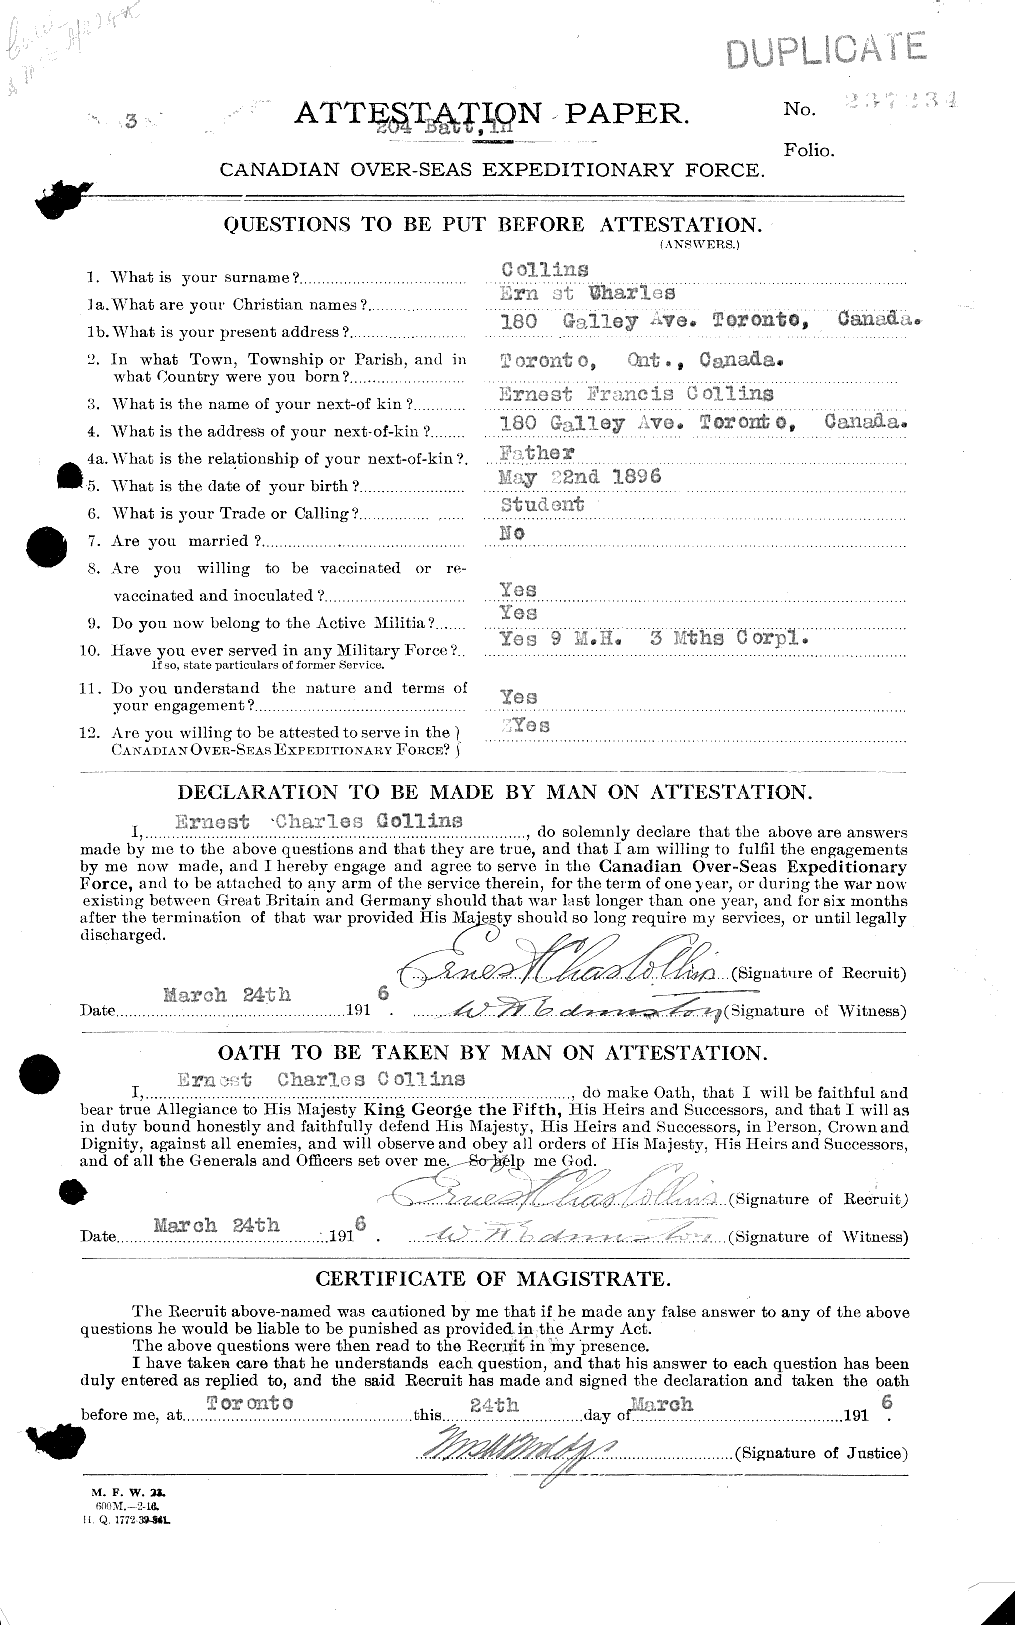 Personnel Records of the First World War - CEF 037770a